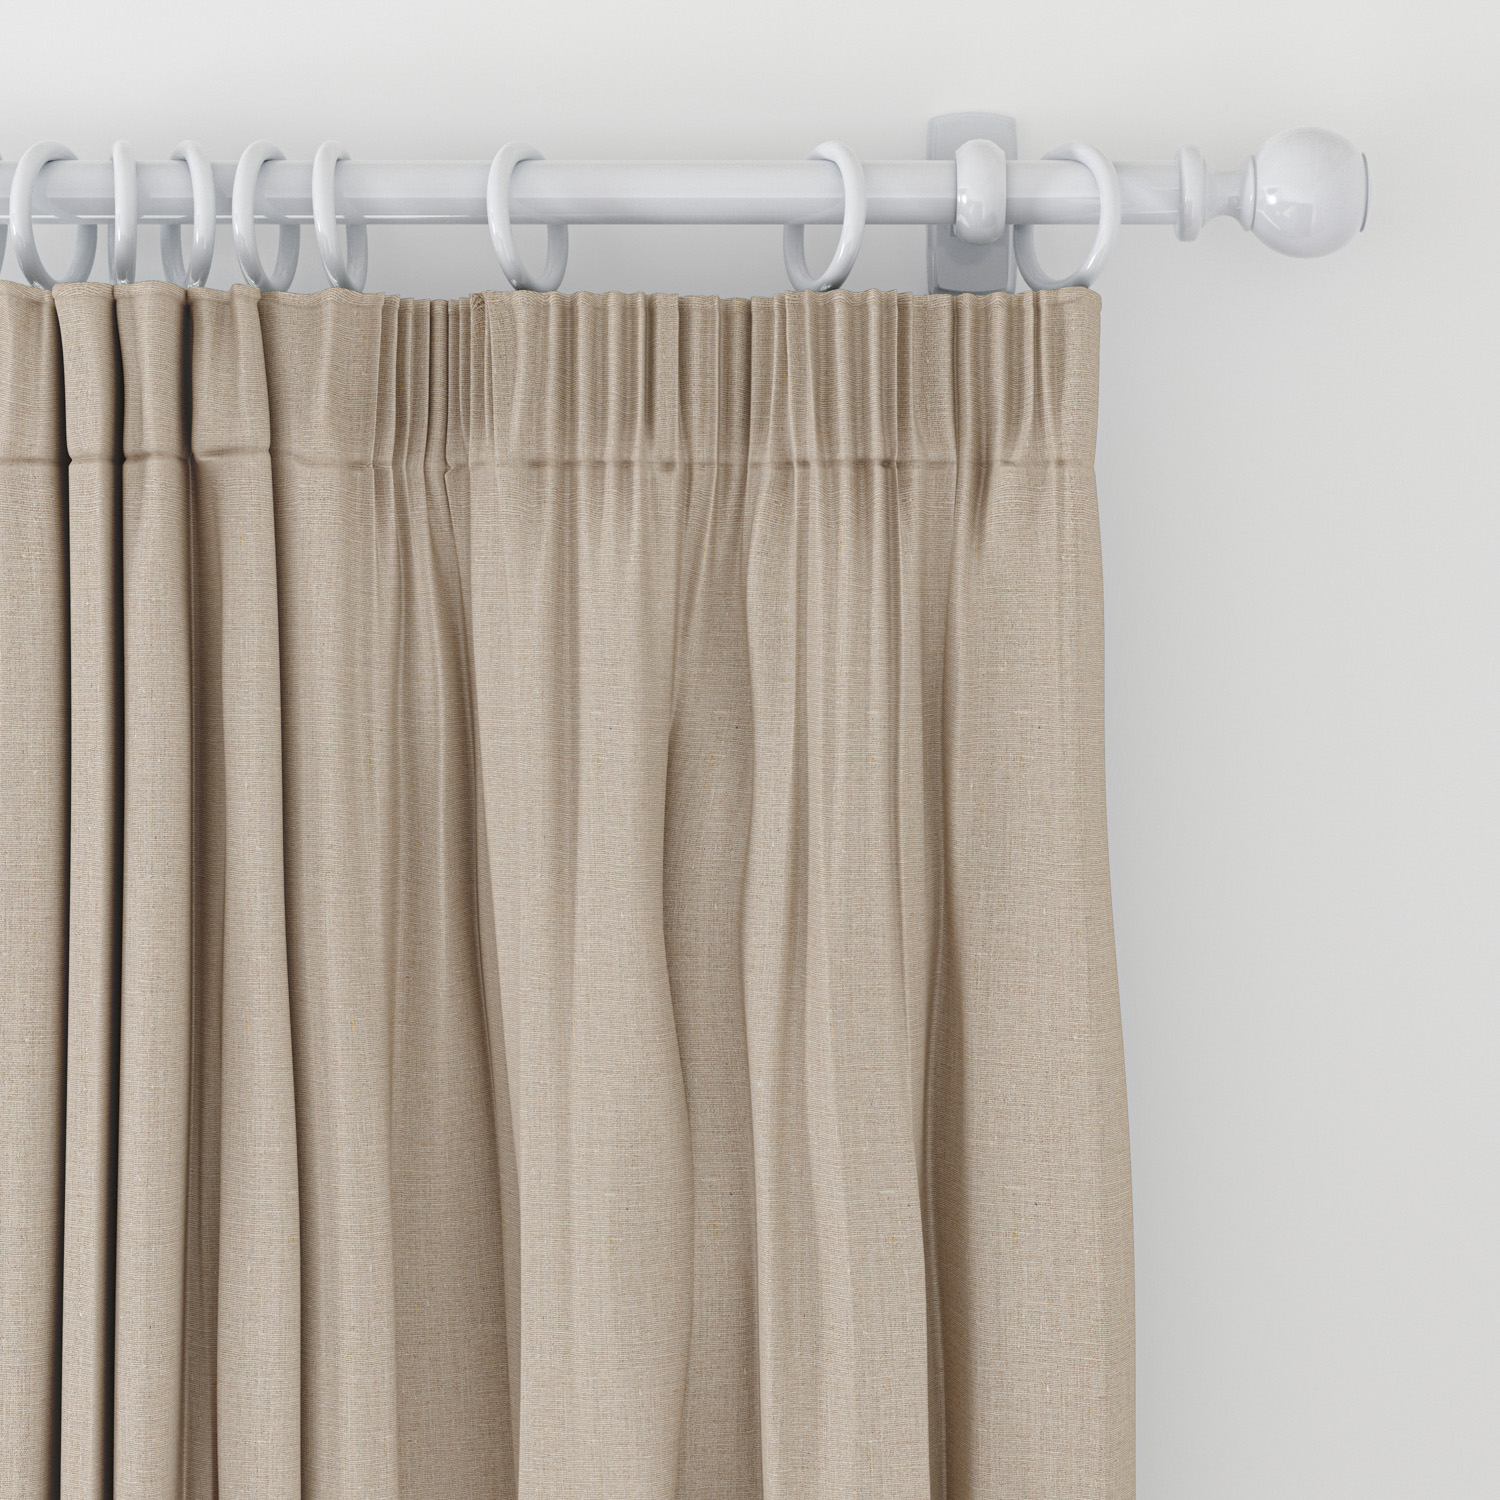 Unlined Ready Made Curtains